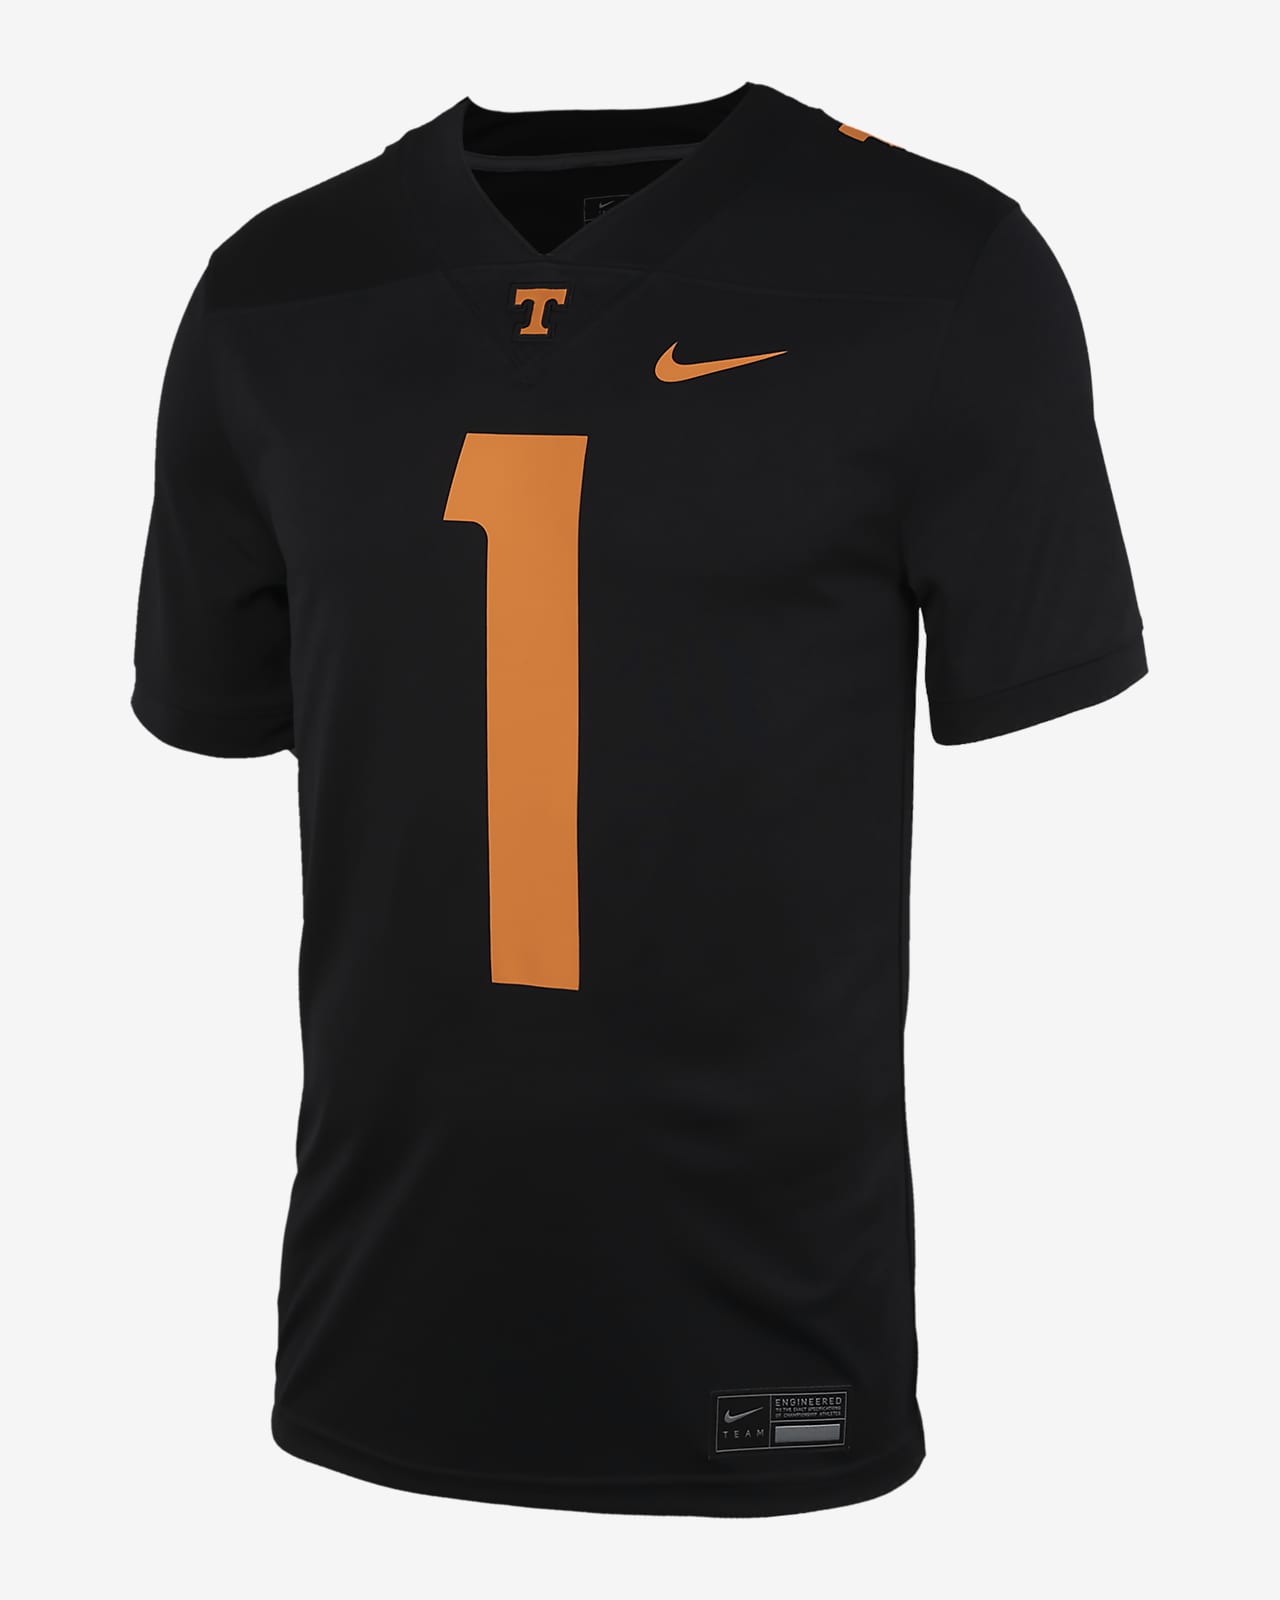 Tennessee 2023 Men's Nike College Football Jersey